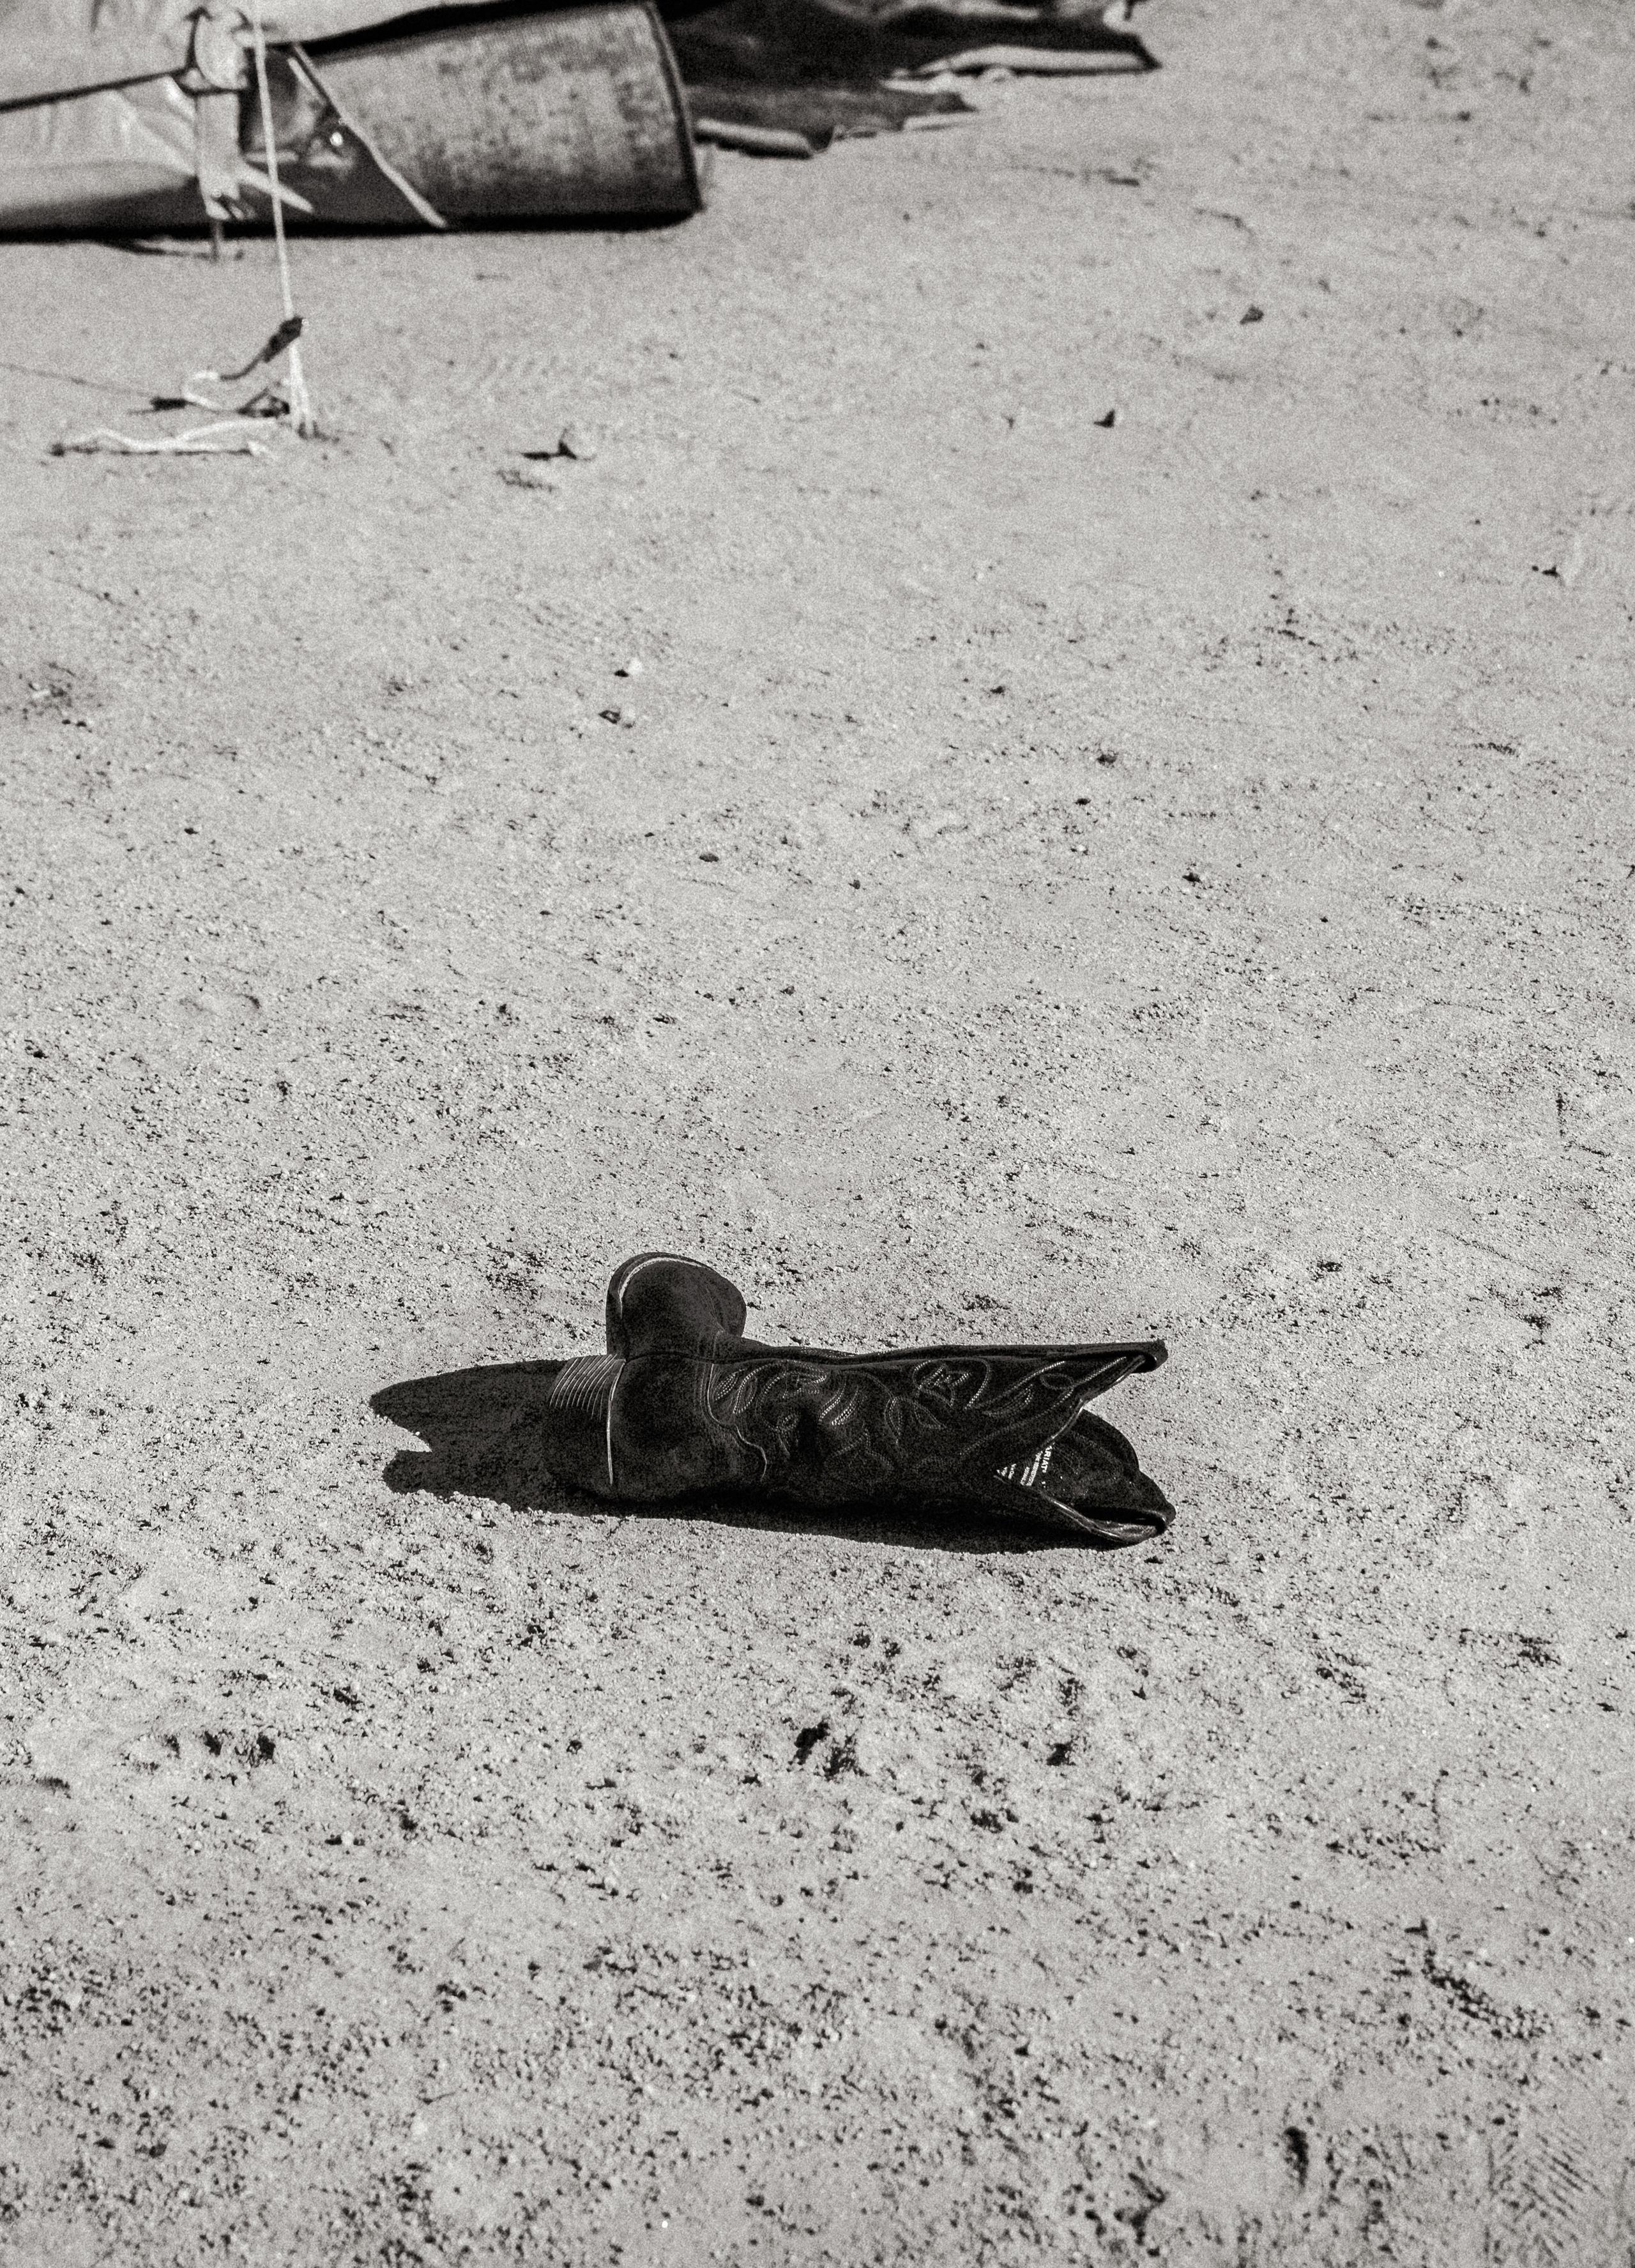 Single cowboy boot laying on dirt ground